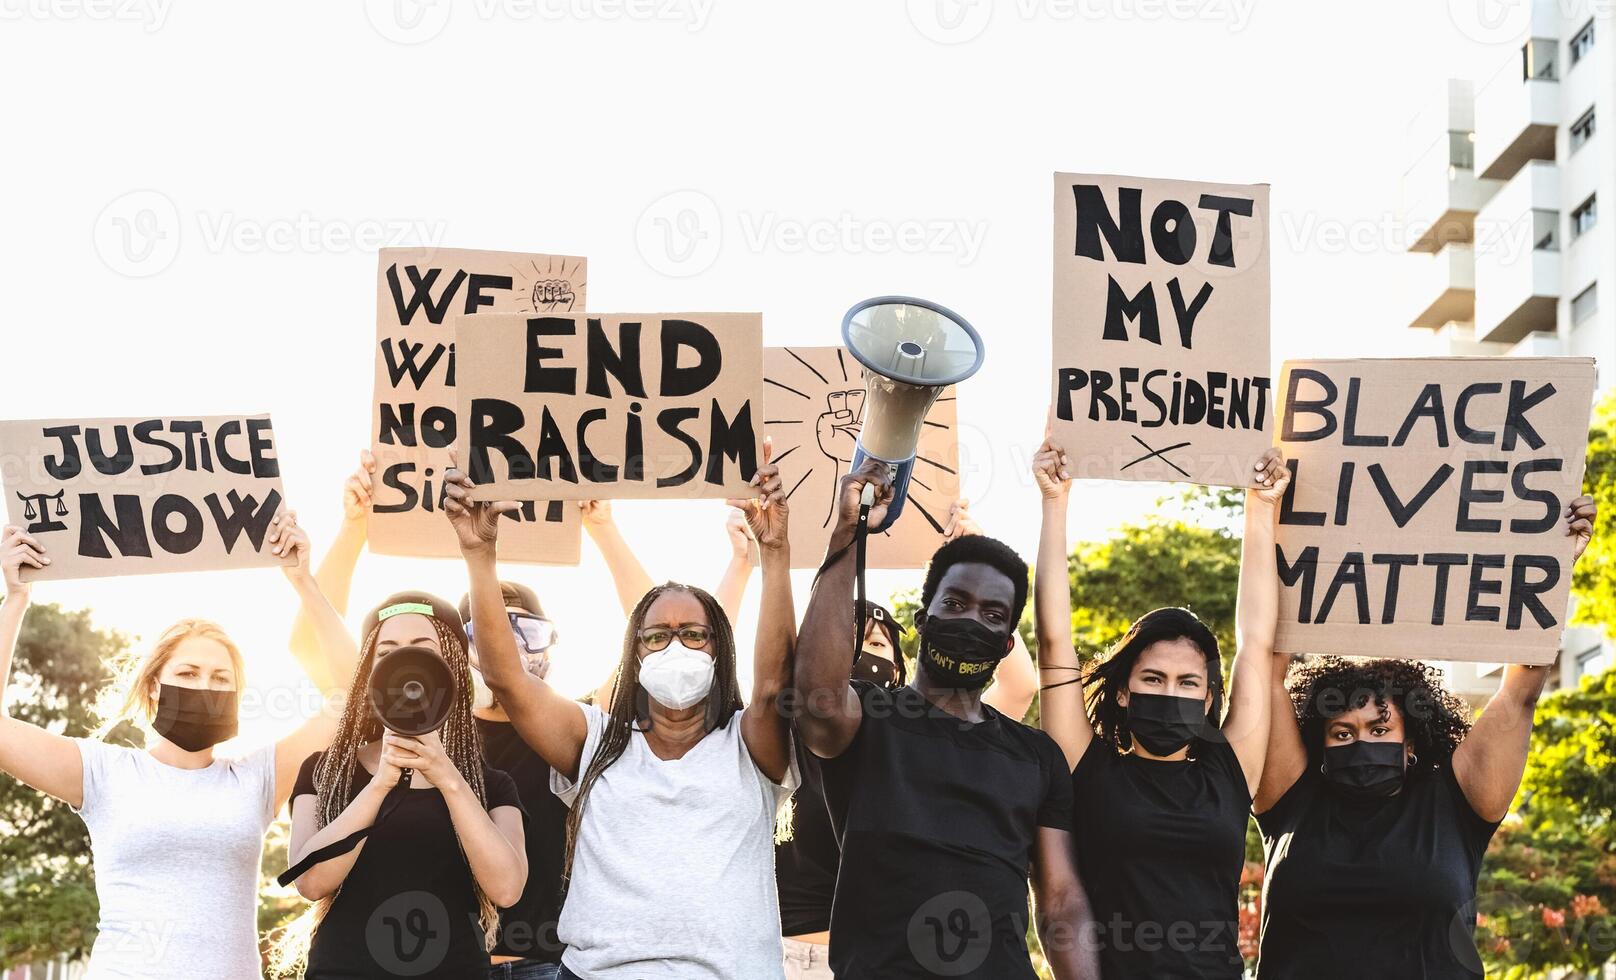 Activist movement protesting against racism and fighting for equality - Demonstrators from different cultures and race protest on street for equal rights - Black lives matter protests city concept photo